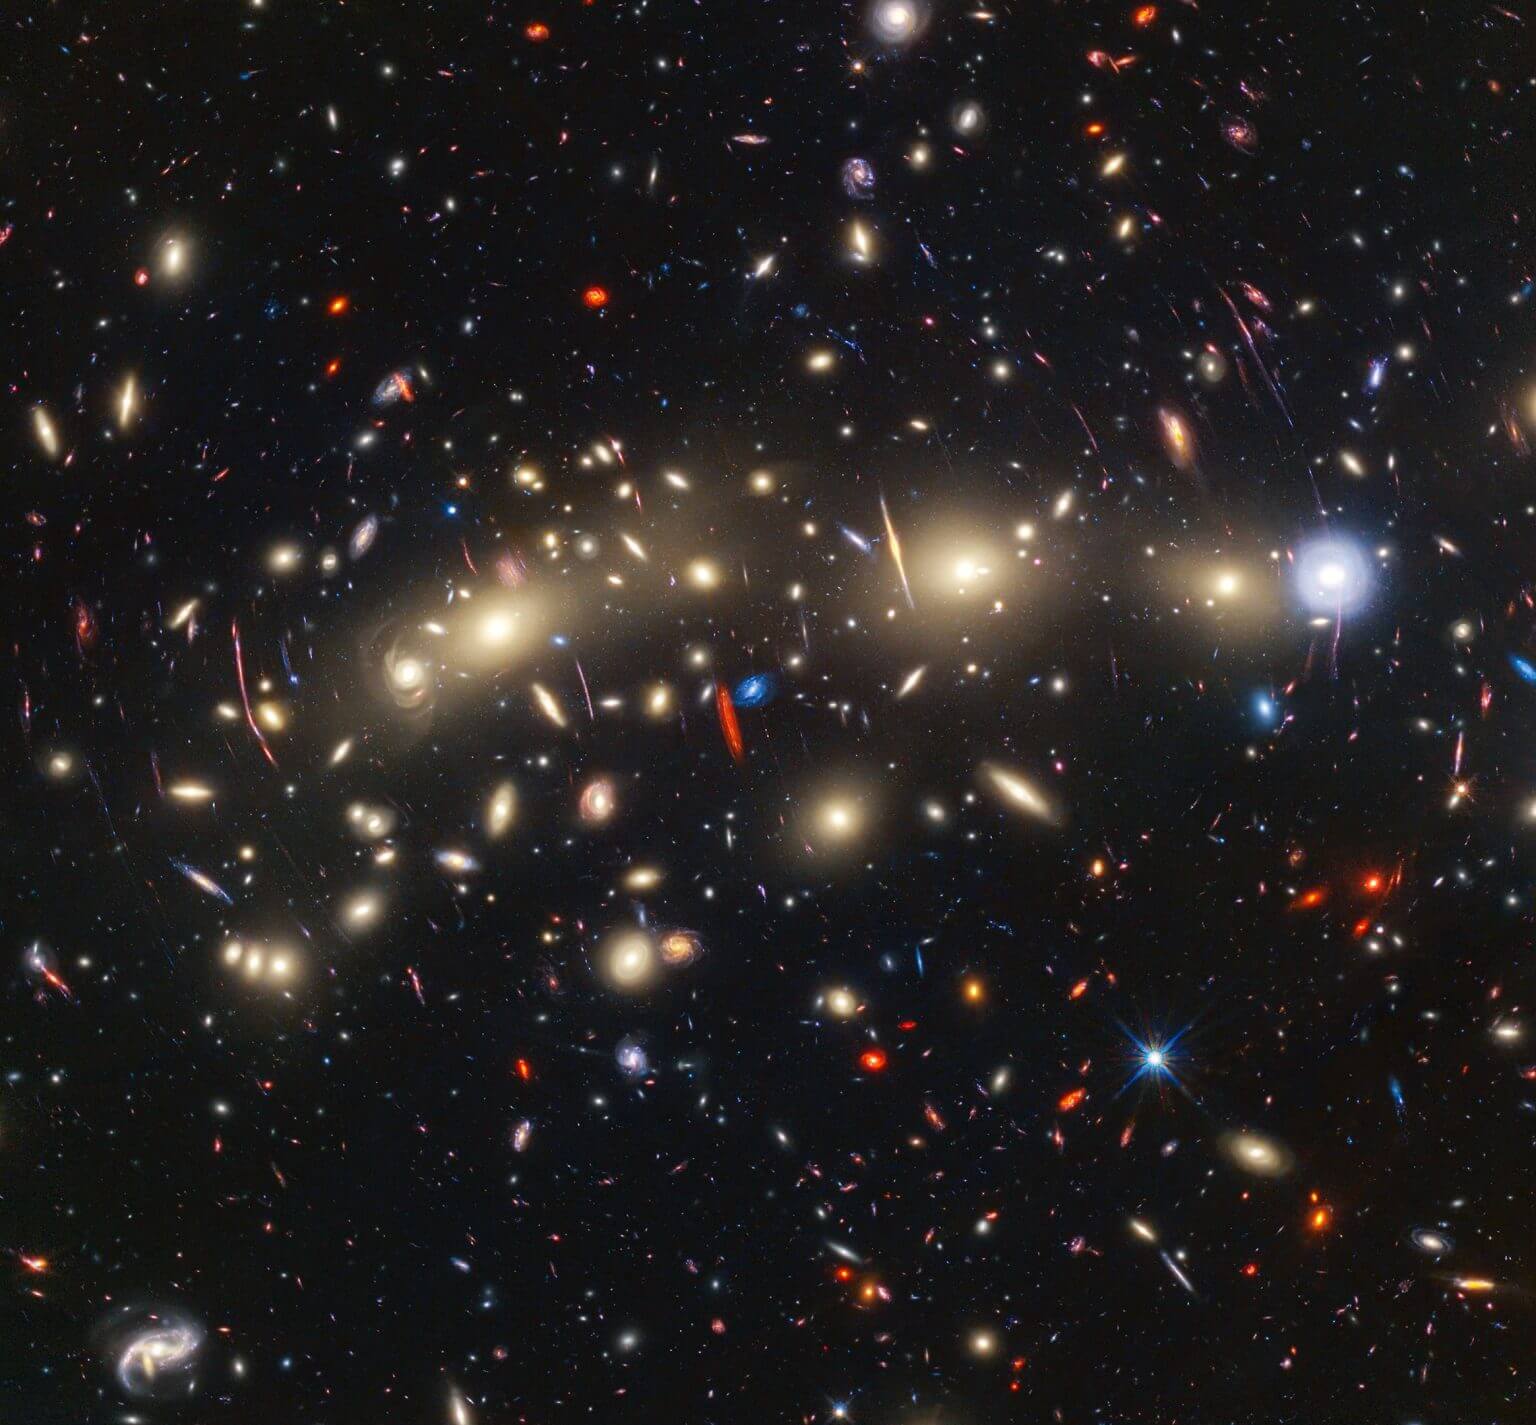 A multi-color view of MACS0416, a galaxy cluster about 4.3 billion light-years from Earth. The image was created by combining infrared observations from NASA's James Webb Space Telescope with visible light data from NASA's Hubble Space Telescope. The resulting prismatic panorama of the blues and reds gives clues to the distances of the galaxies. Credit: NASA, ESA, CSA, STScI, Jose M. Diego (IFCA), Jordan CJ D'Silva (UWA), Anton M. Koekemoer (STScI), Jake Summers (ASU), Rogier Windhorst (ASU), Haojing Yan ( University of Missouri